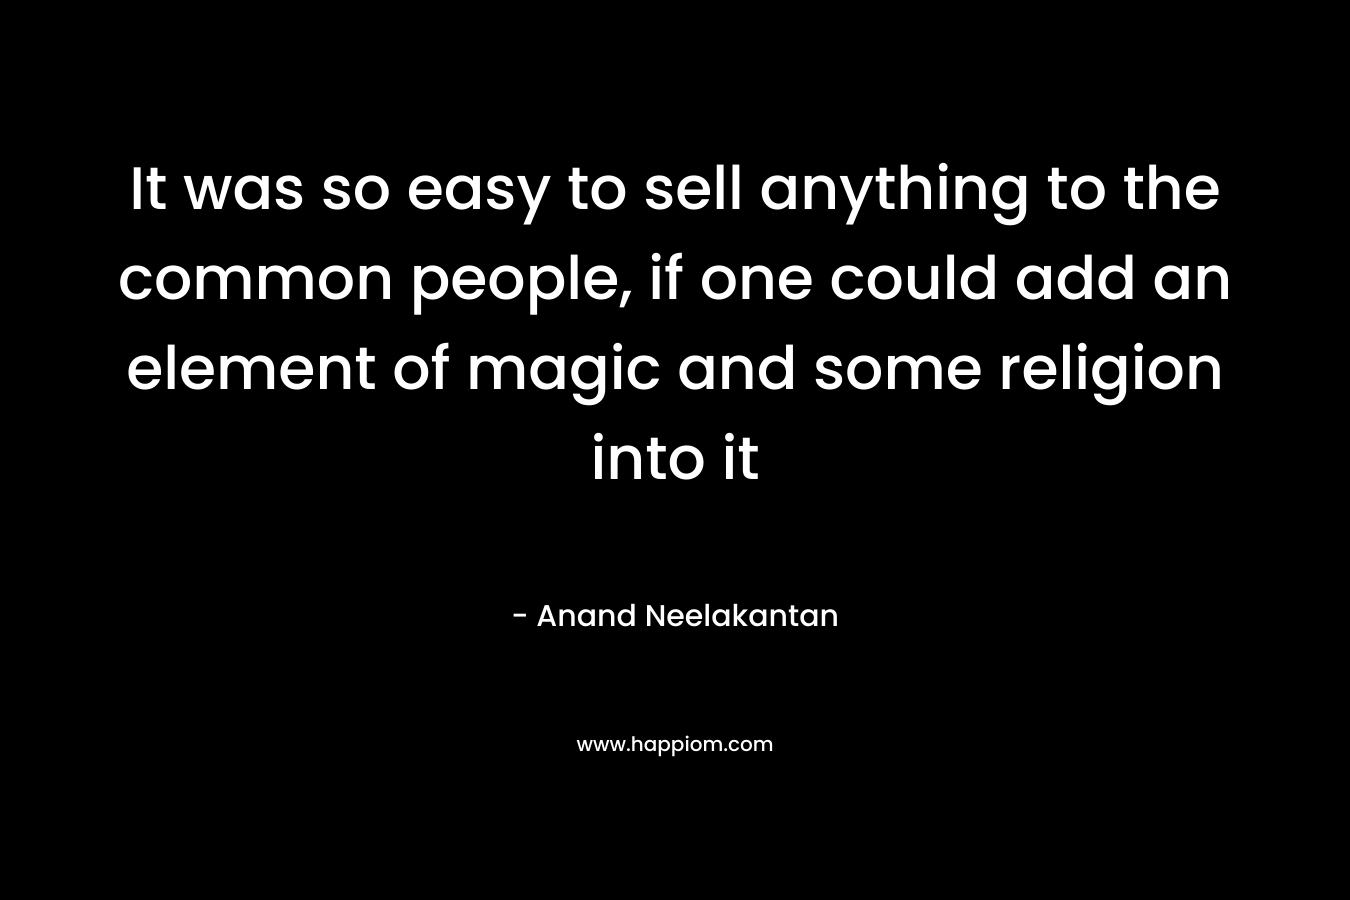 It was so easy to sell anything to the common people, if one could add an element of magic and some religion into it – Anand Neelakantan